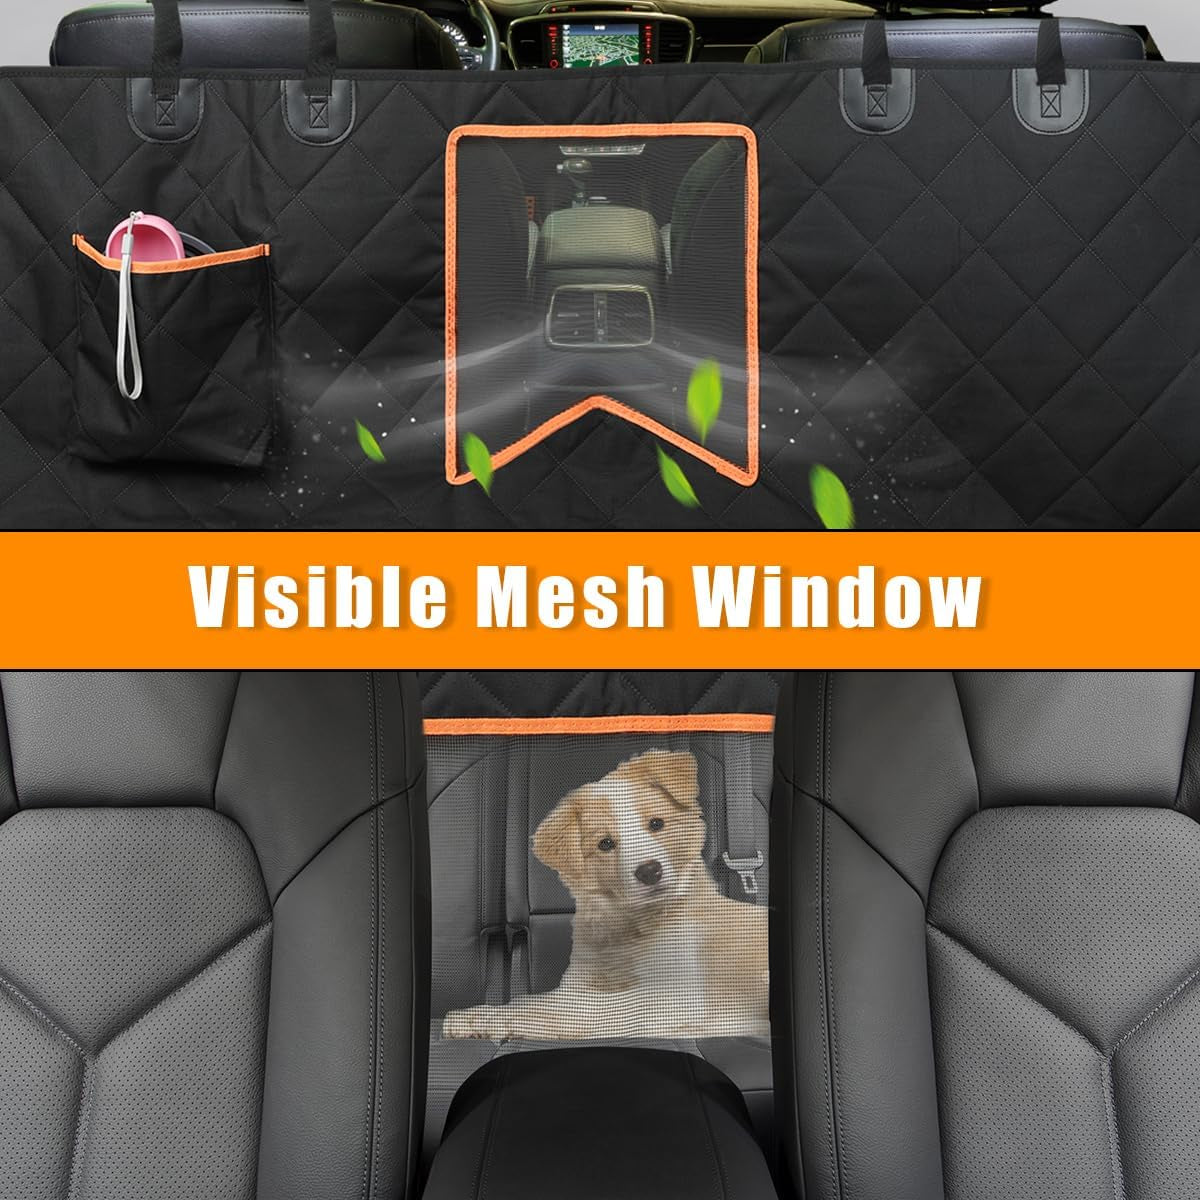 Dog Car Seat Cover for Back Seat, 100% Waterproof Dog Seat Cover with Mesh Window, Anti-Scratch Nonslip Durable Soft Pet Dog Car Hammock for Cars Trucks and SUV